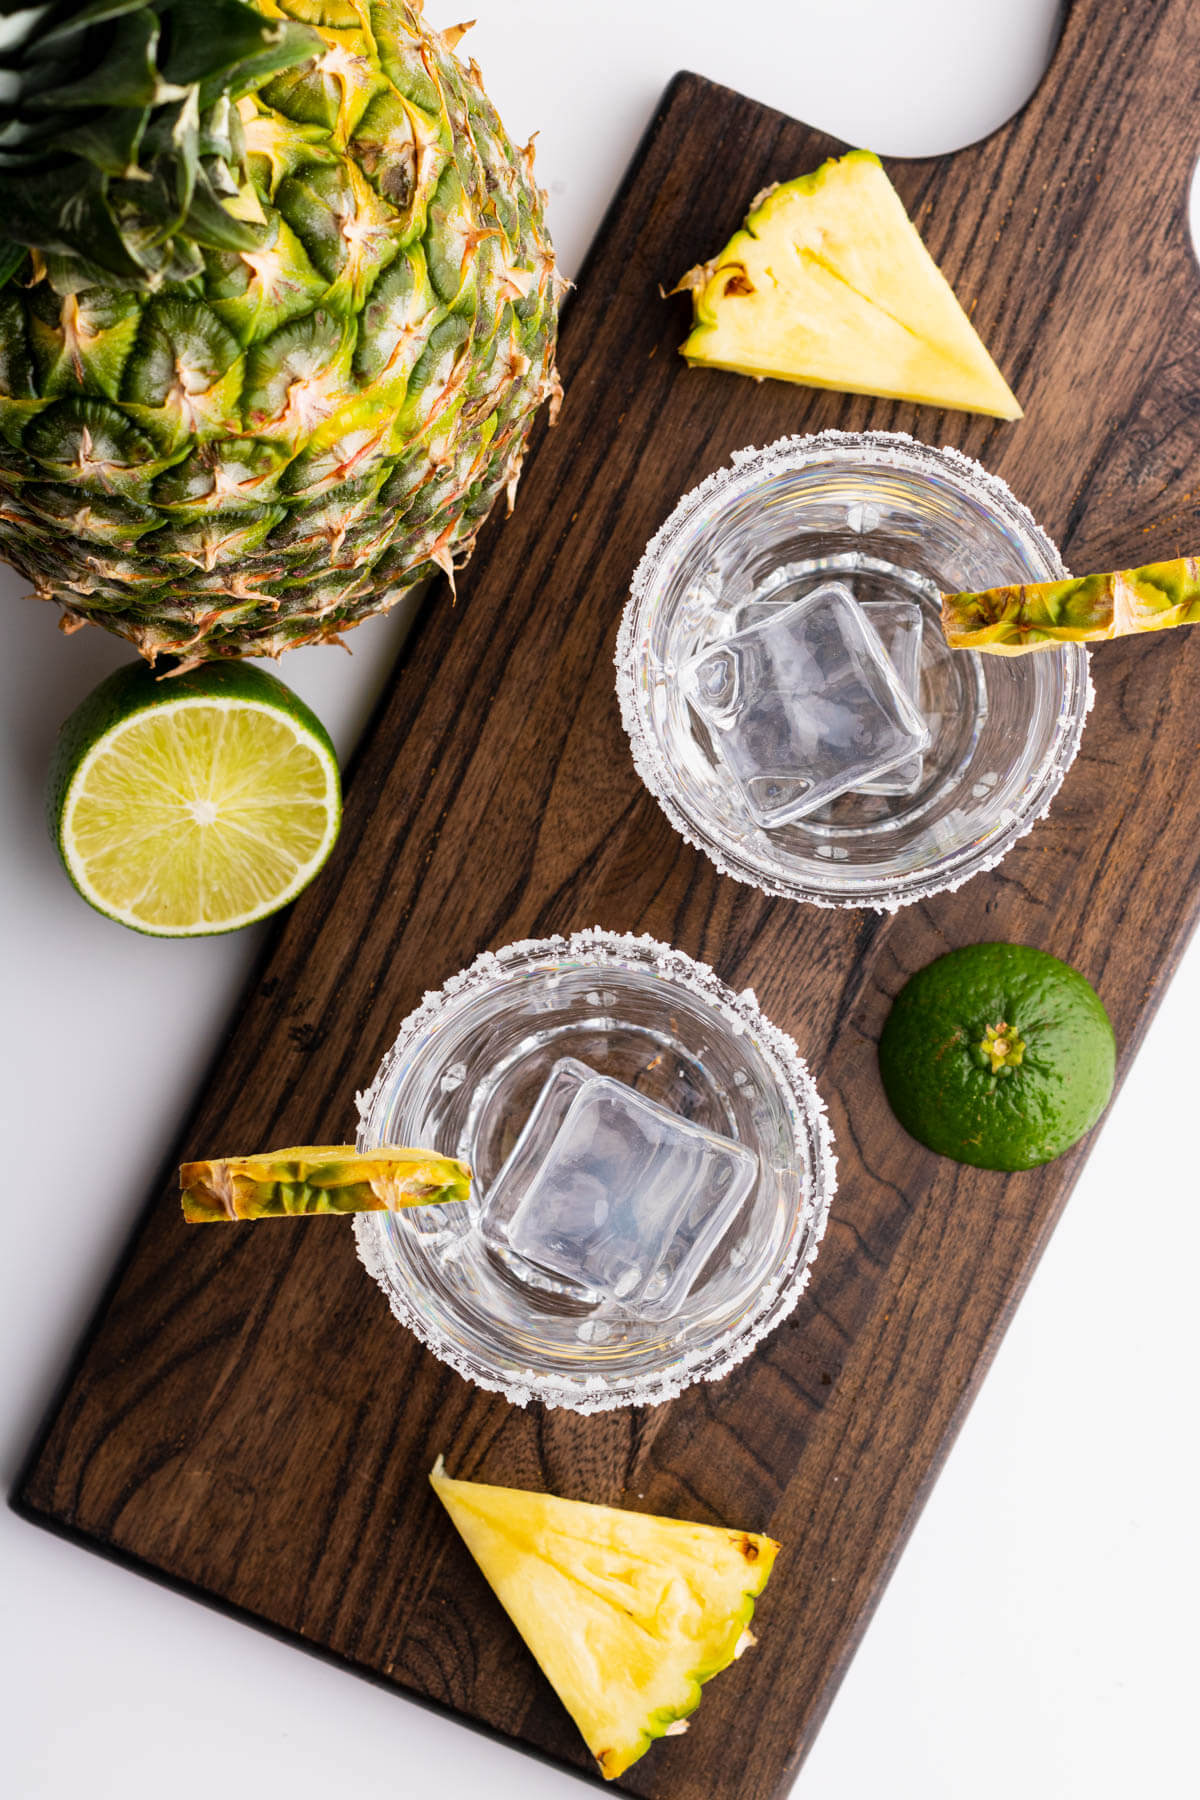 Two empty rimmed rocks glasses filled with ice and garnished with a slice of pineapple.